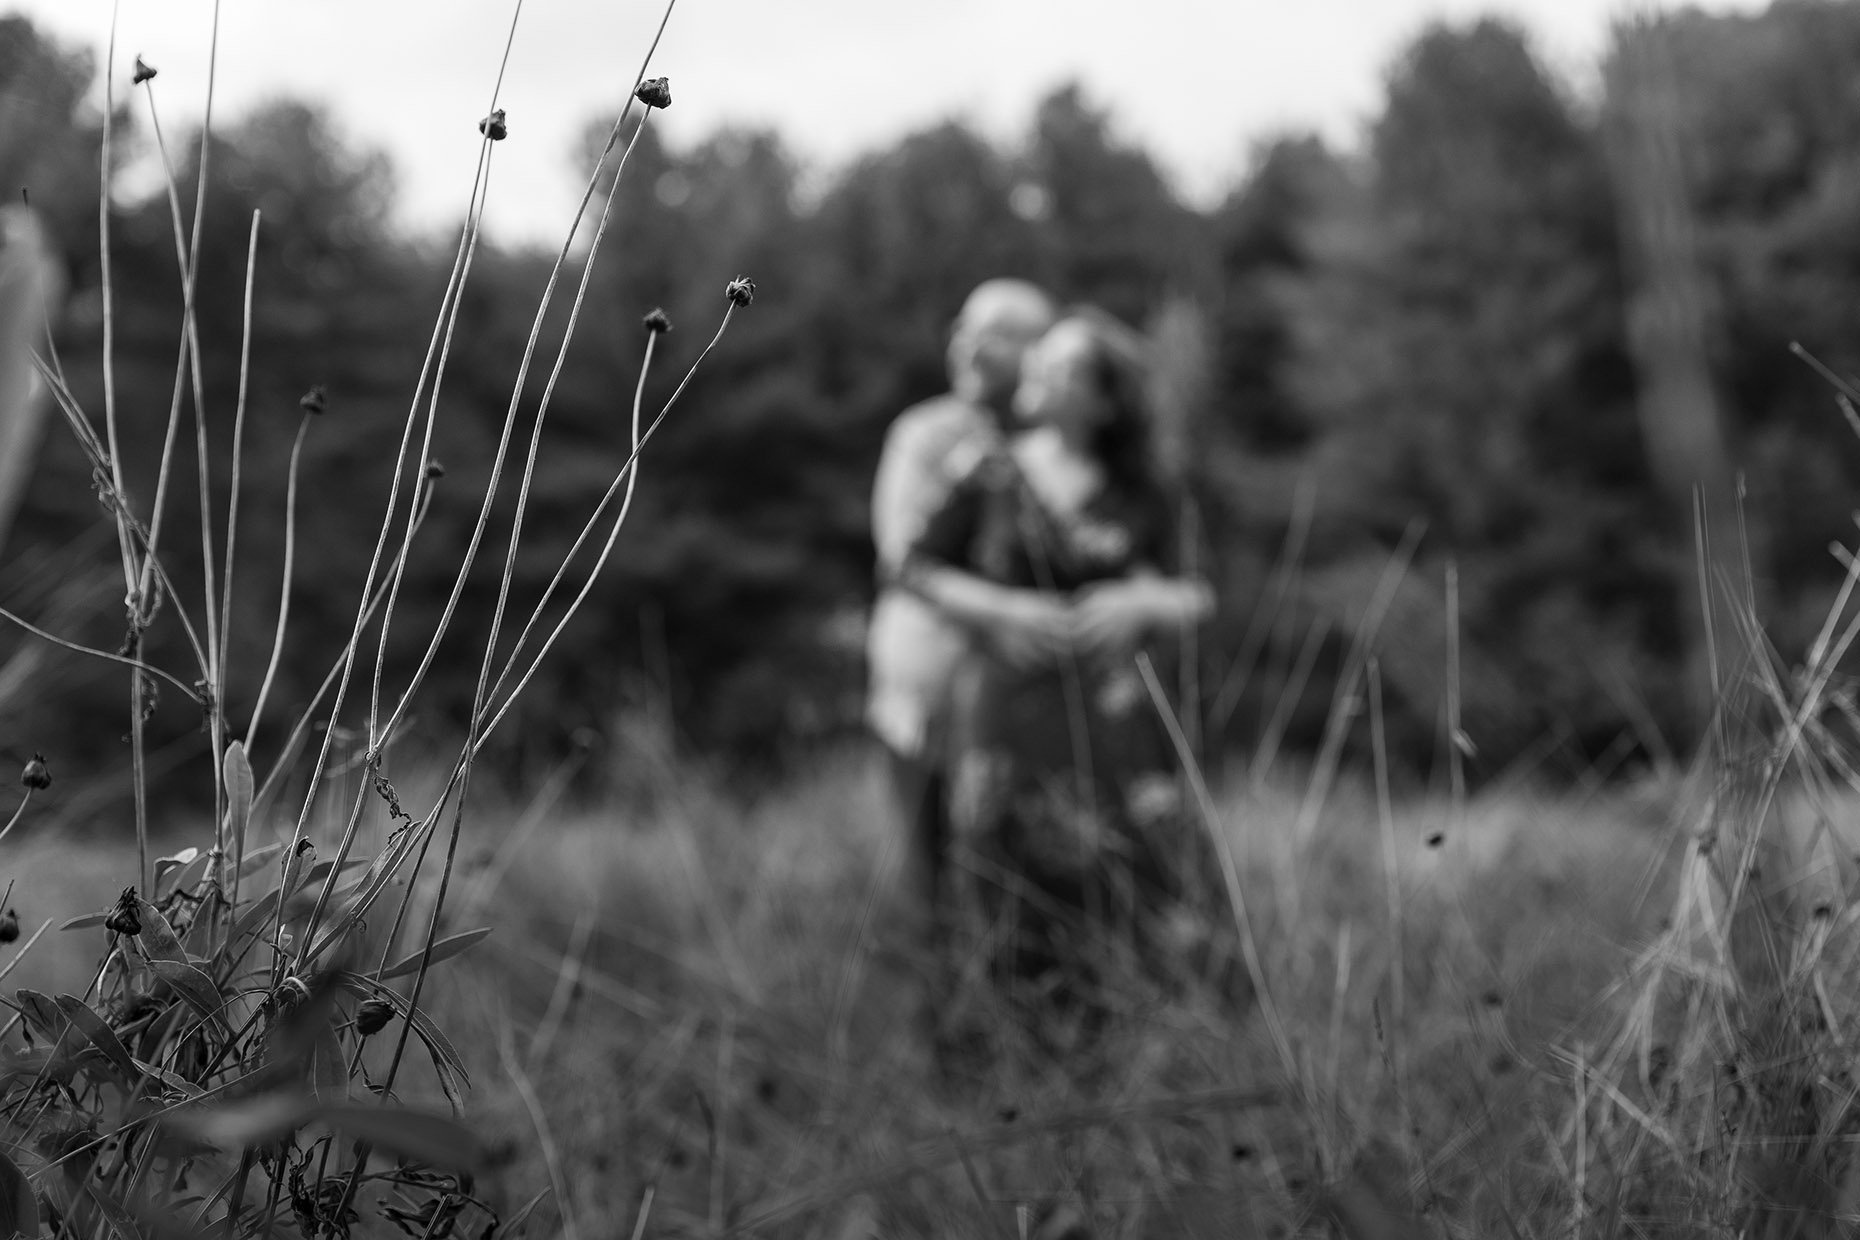 Couple in a grassy field out of focus